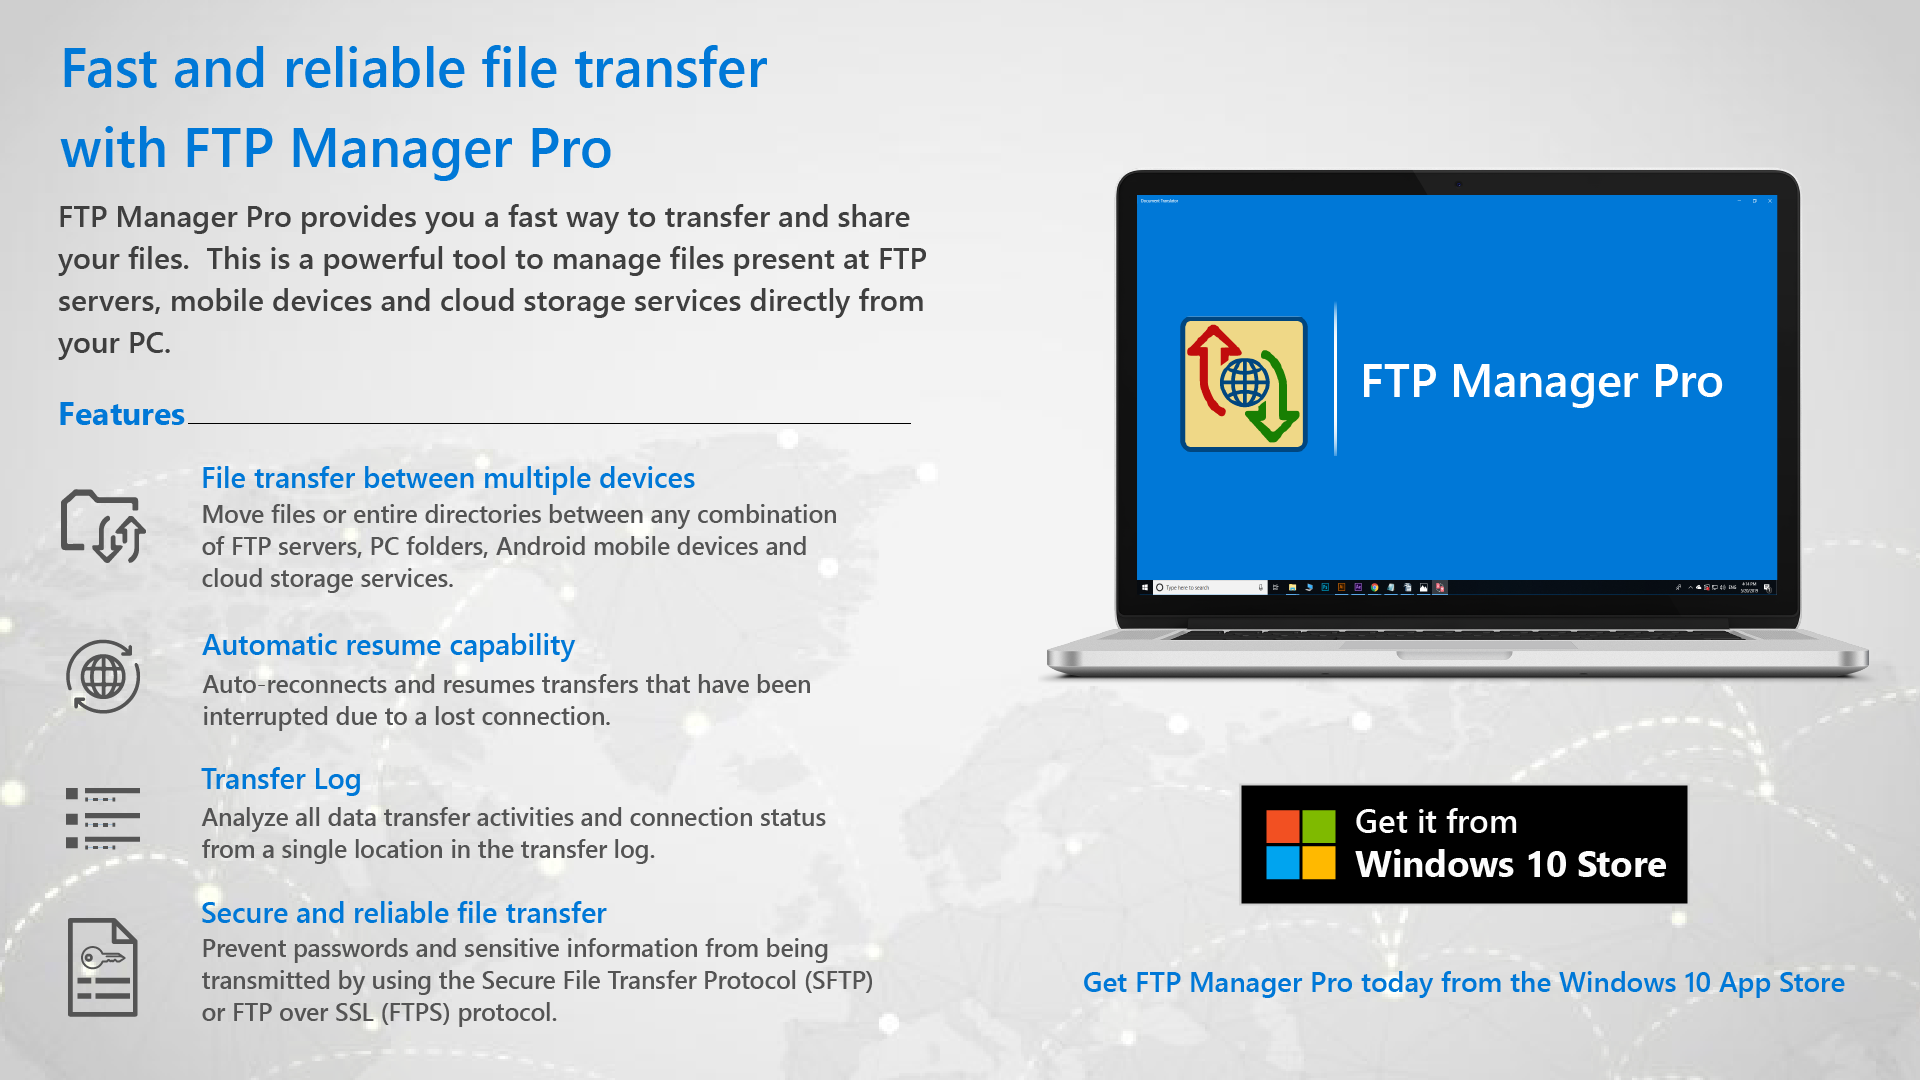 FTP Manager Pro Features